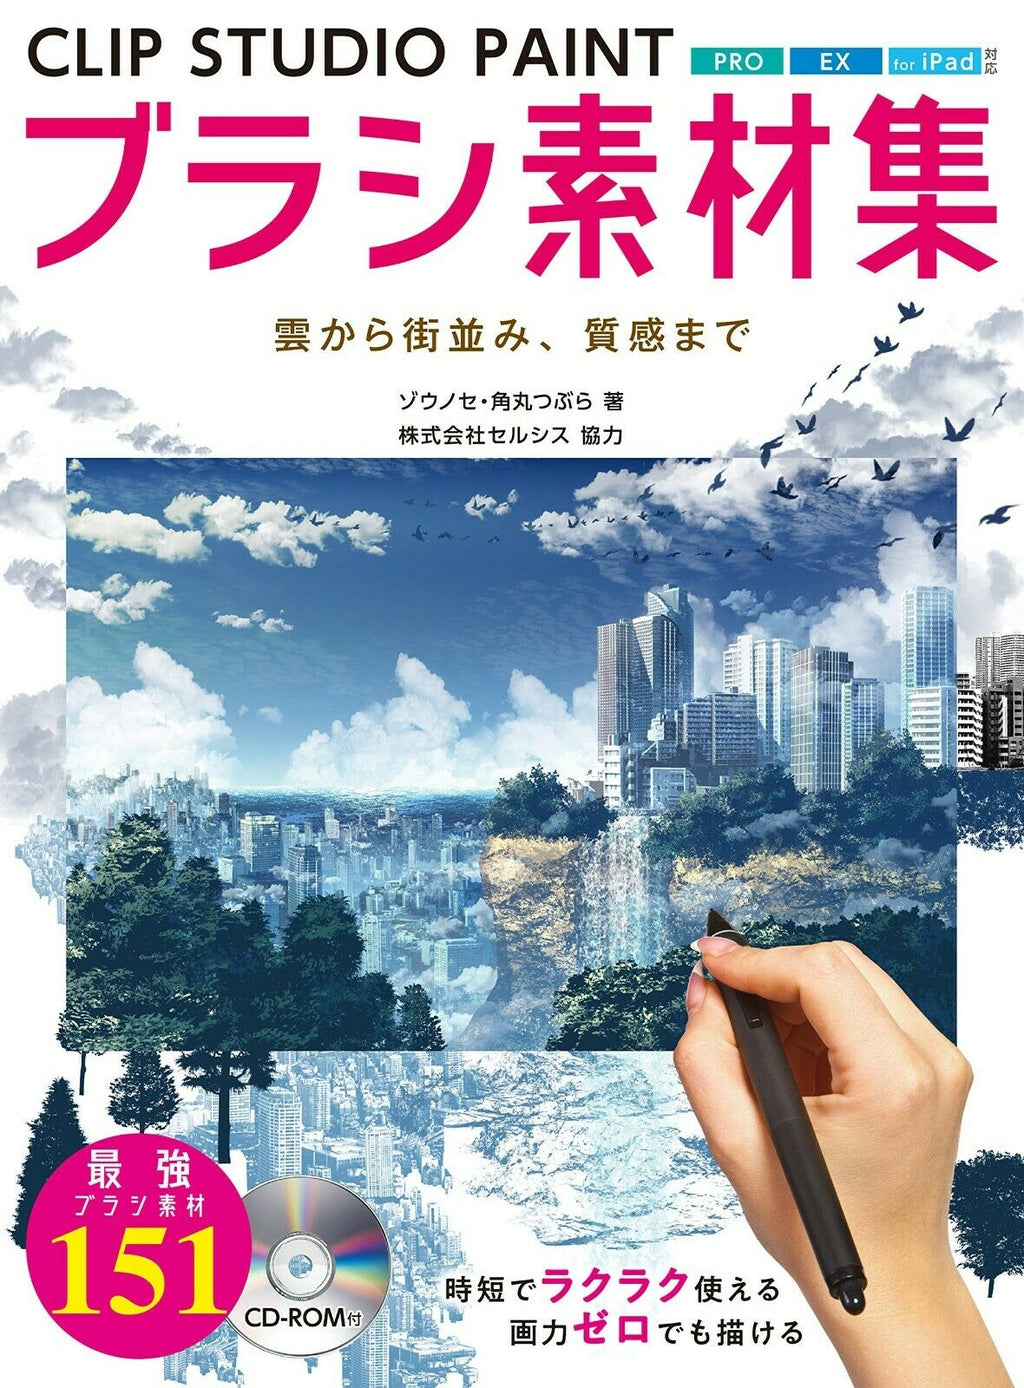 NEW" How To Draw Manga CLIP STUDIO PAINT Brushes Collection Book | Japan Art